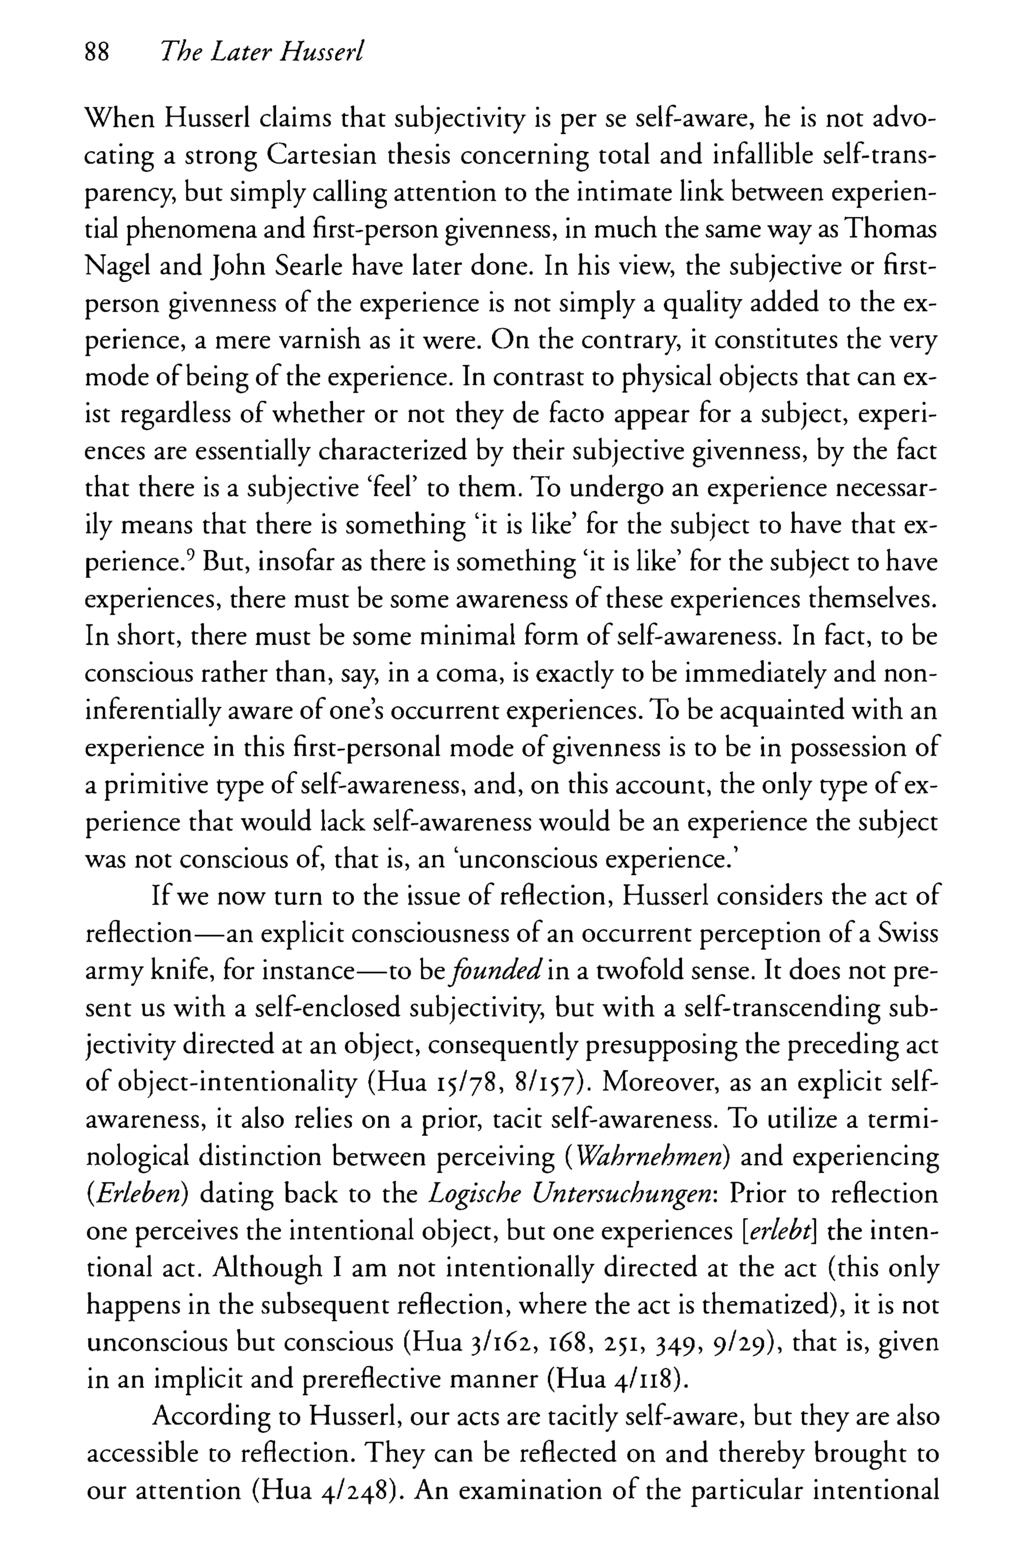 88 The Later Husserl When Husserl claims that subjectivity is per se self-aware, he is not advocating a strong Cartesian thesis concerning total and infallible self-transparency, but simply calling